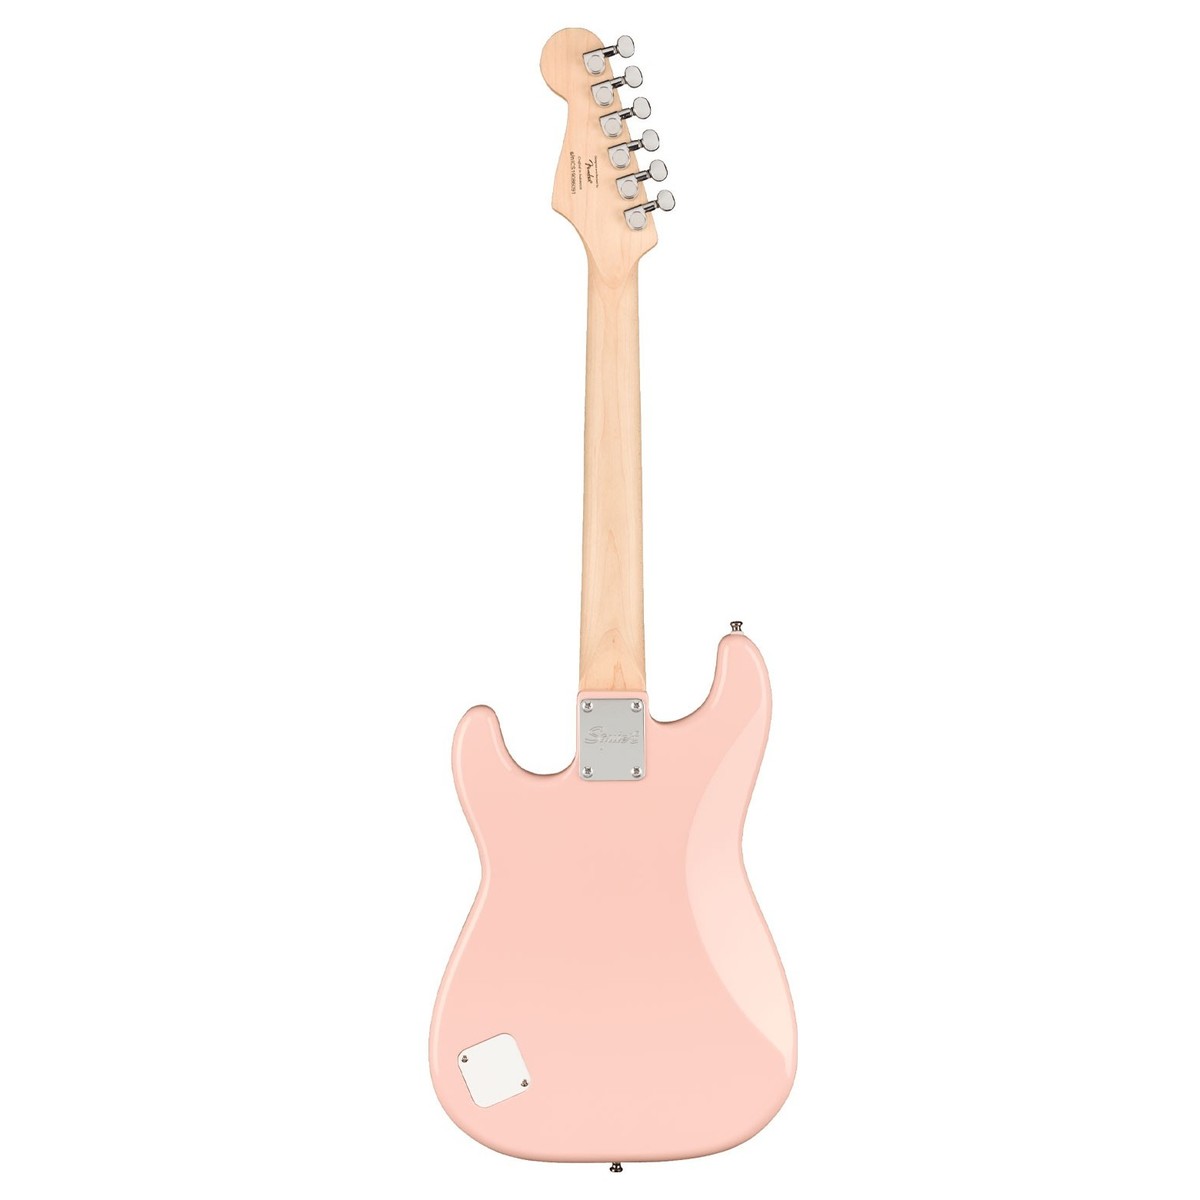 Squier Mini Stratocaster Size 3/4 Shell Pink